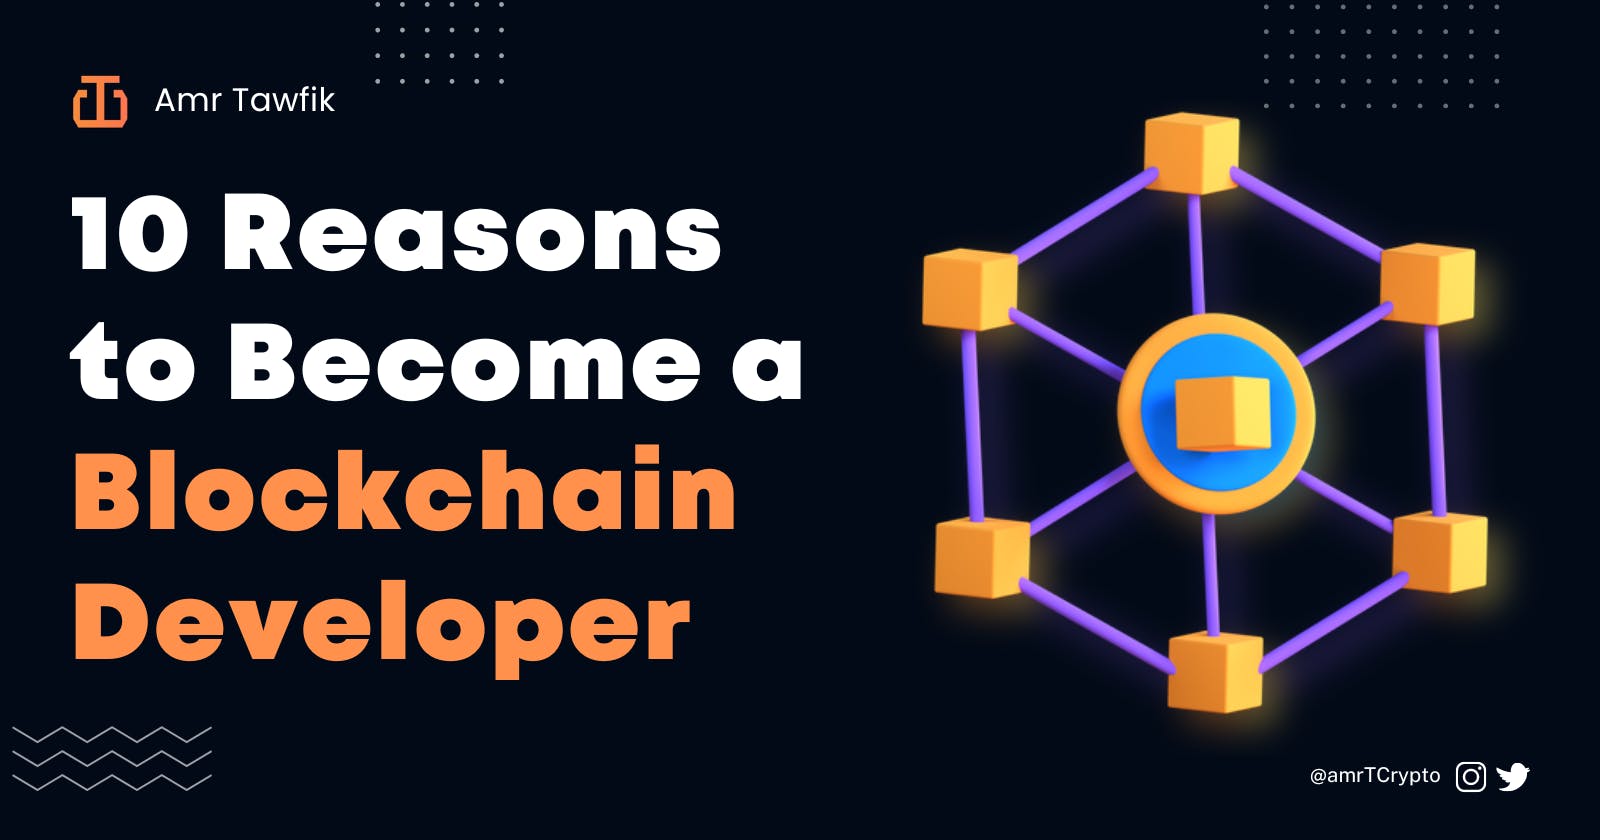 10 Reasons to Become a Blockchain Developer